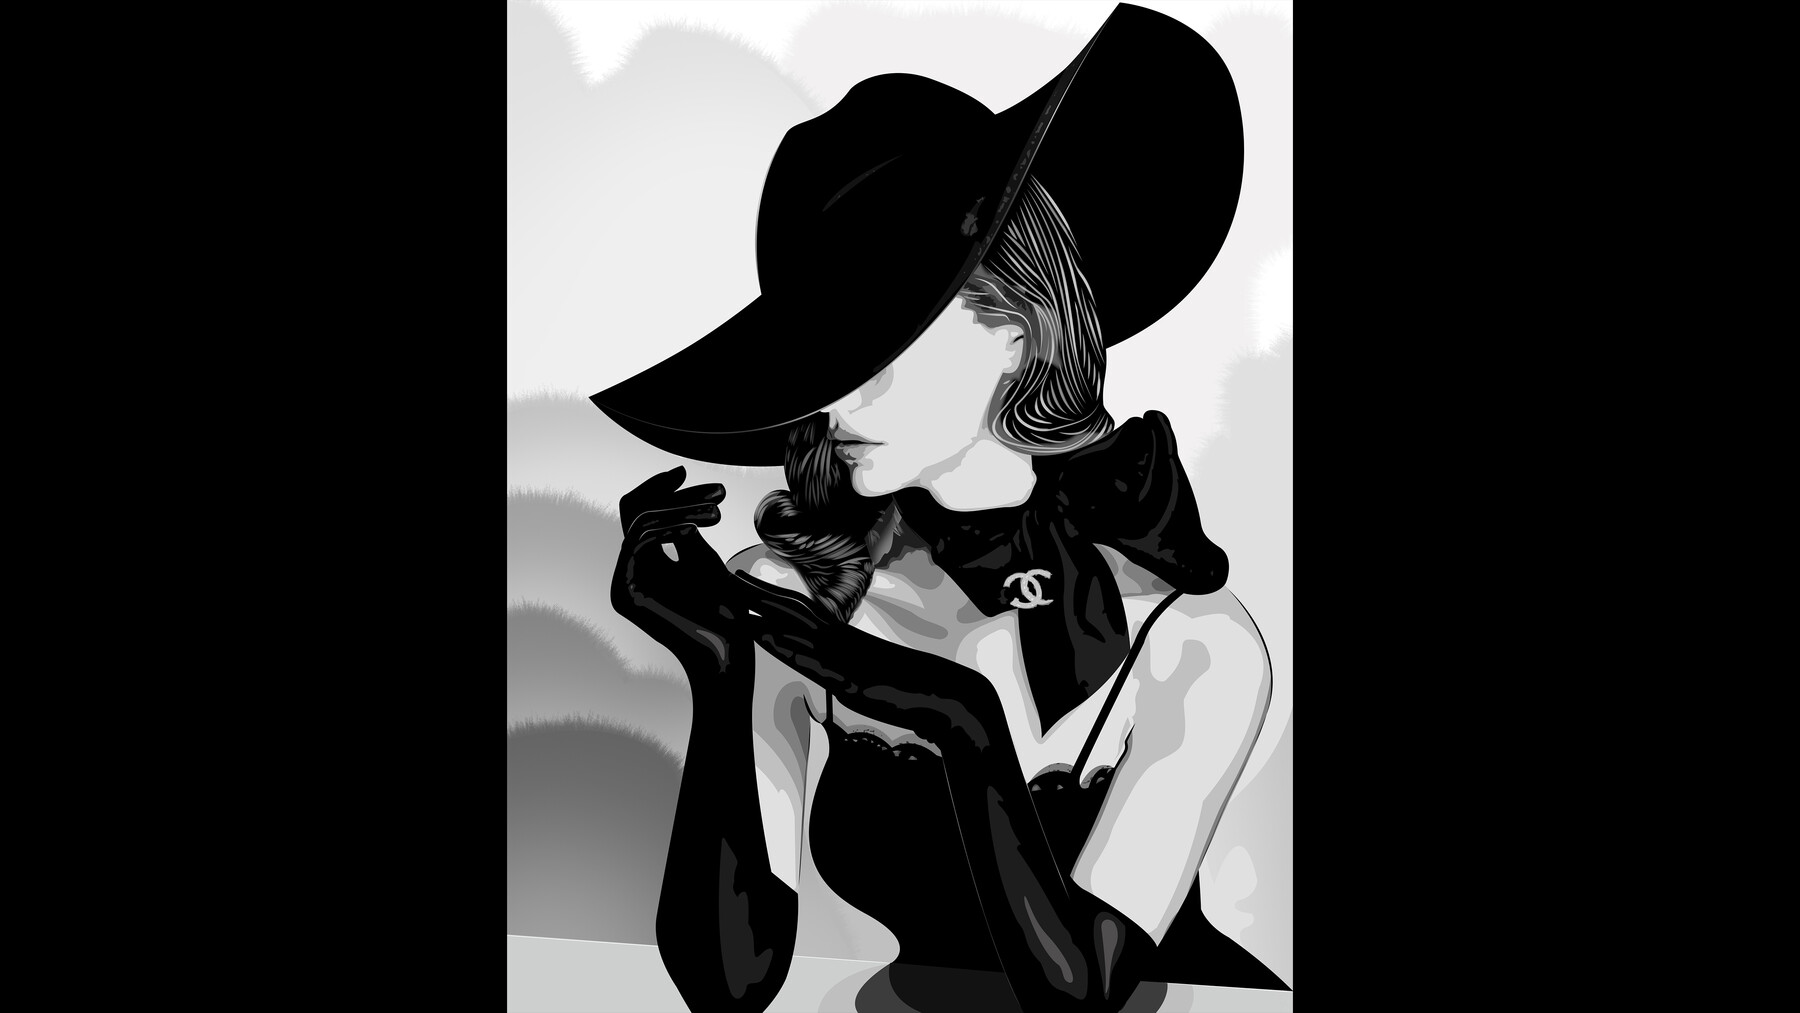 ArtStation - The woman in the hat. | Artworks